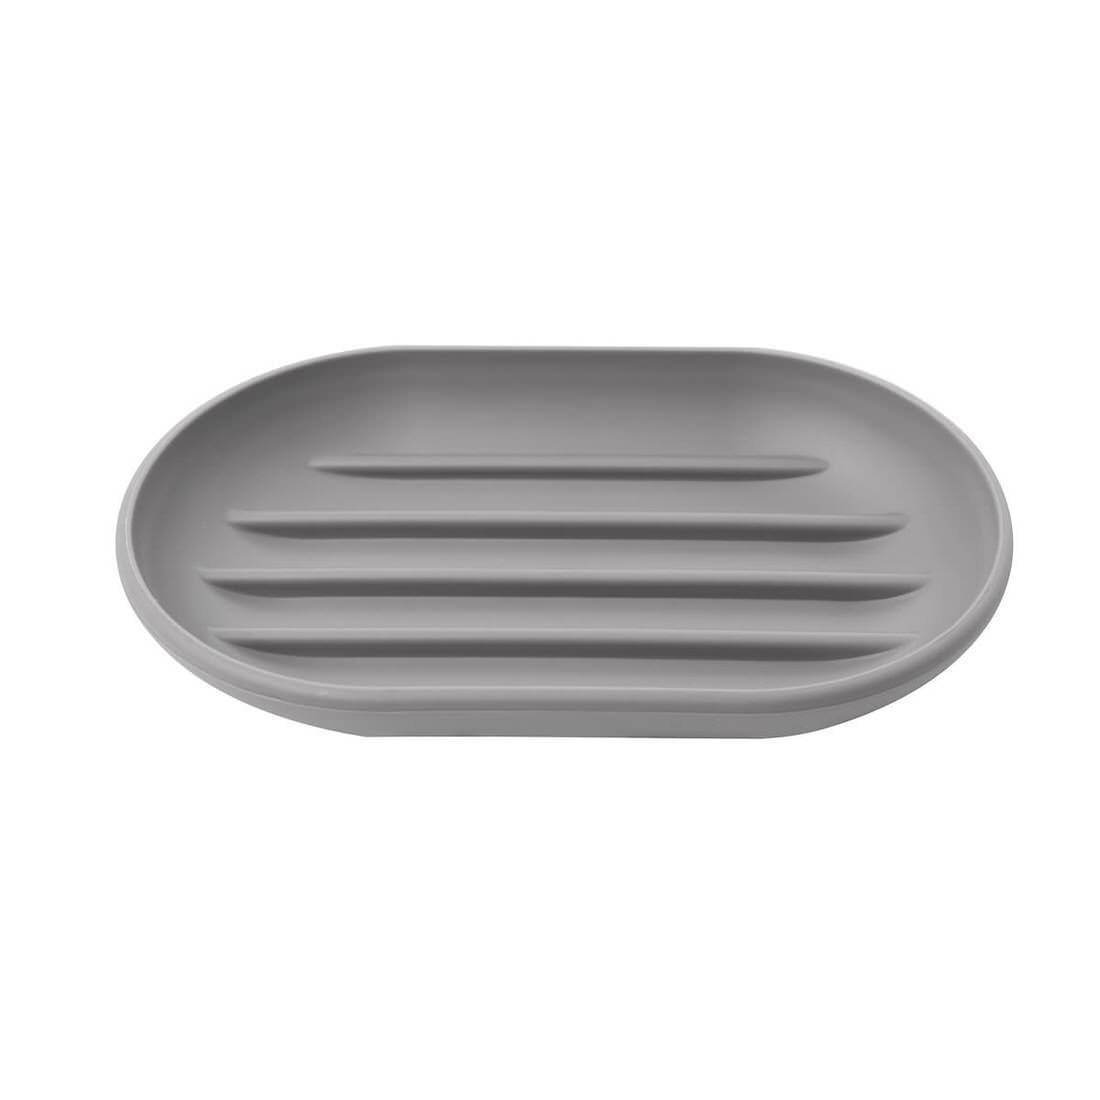 Umbra Touch Soap Dish Grey